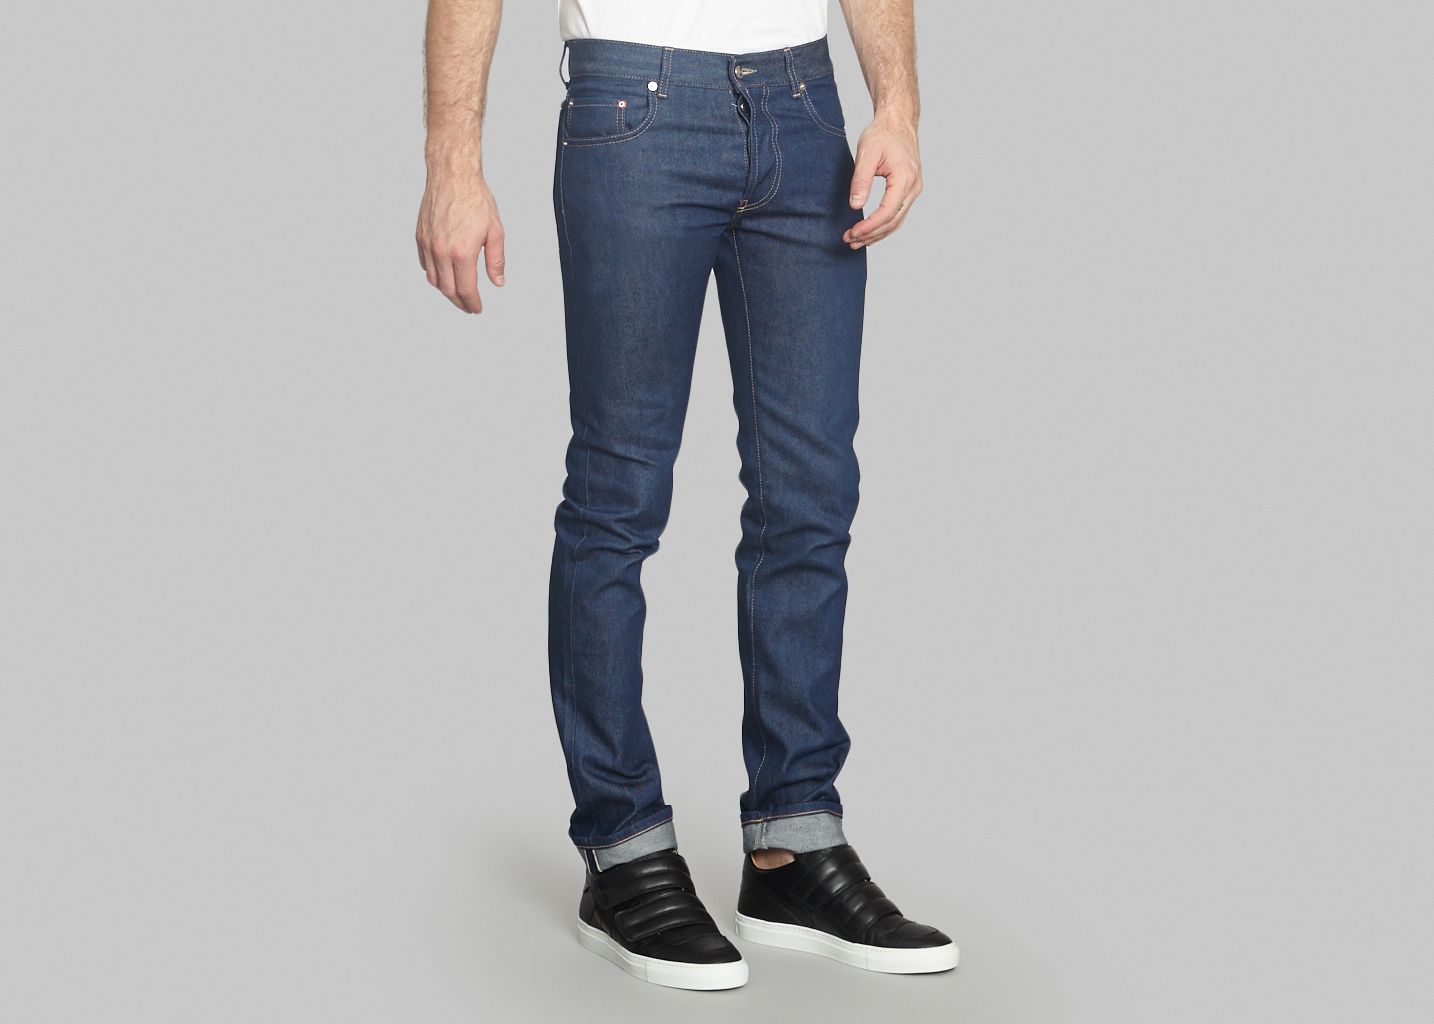 Induction Jeans - The Faraday Project